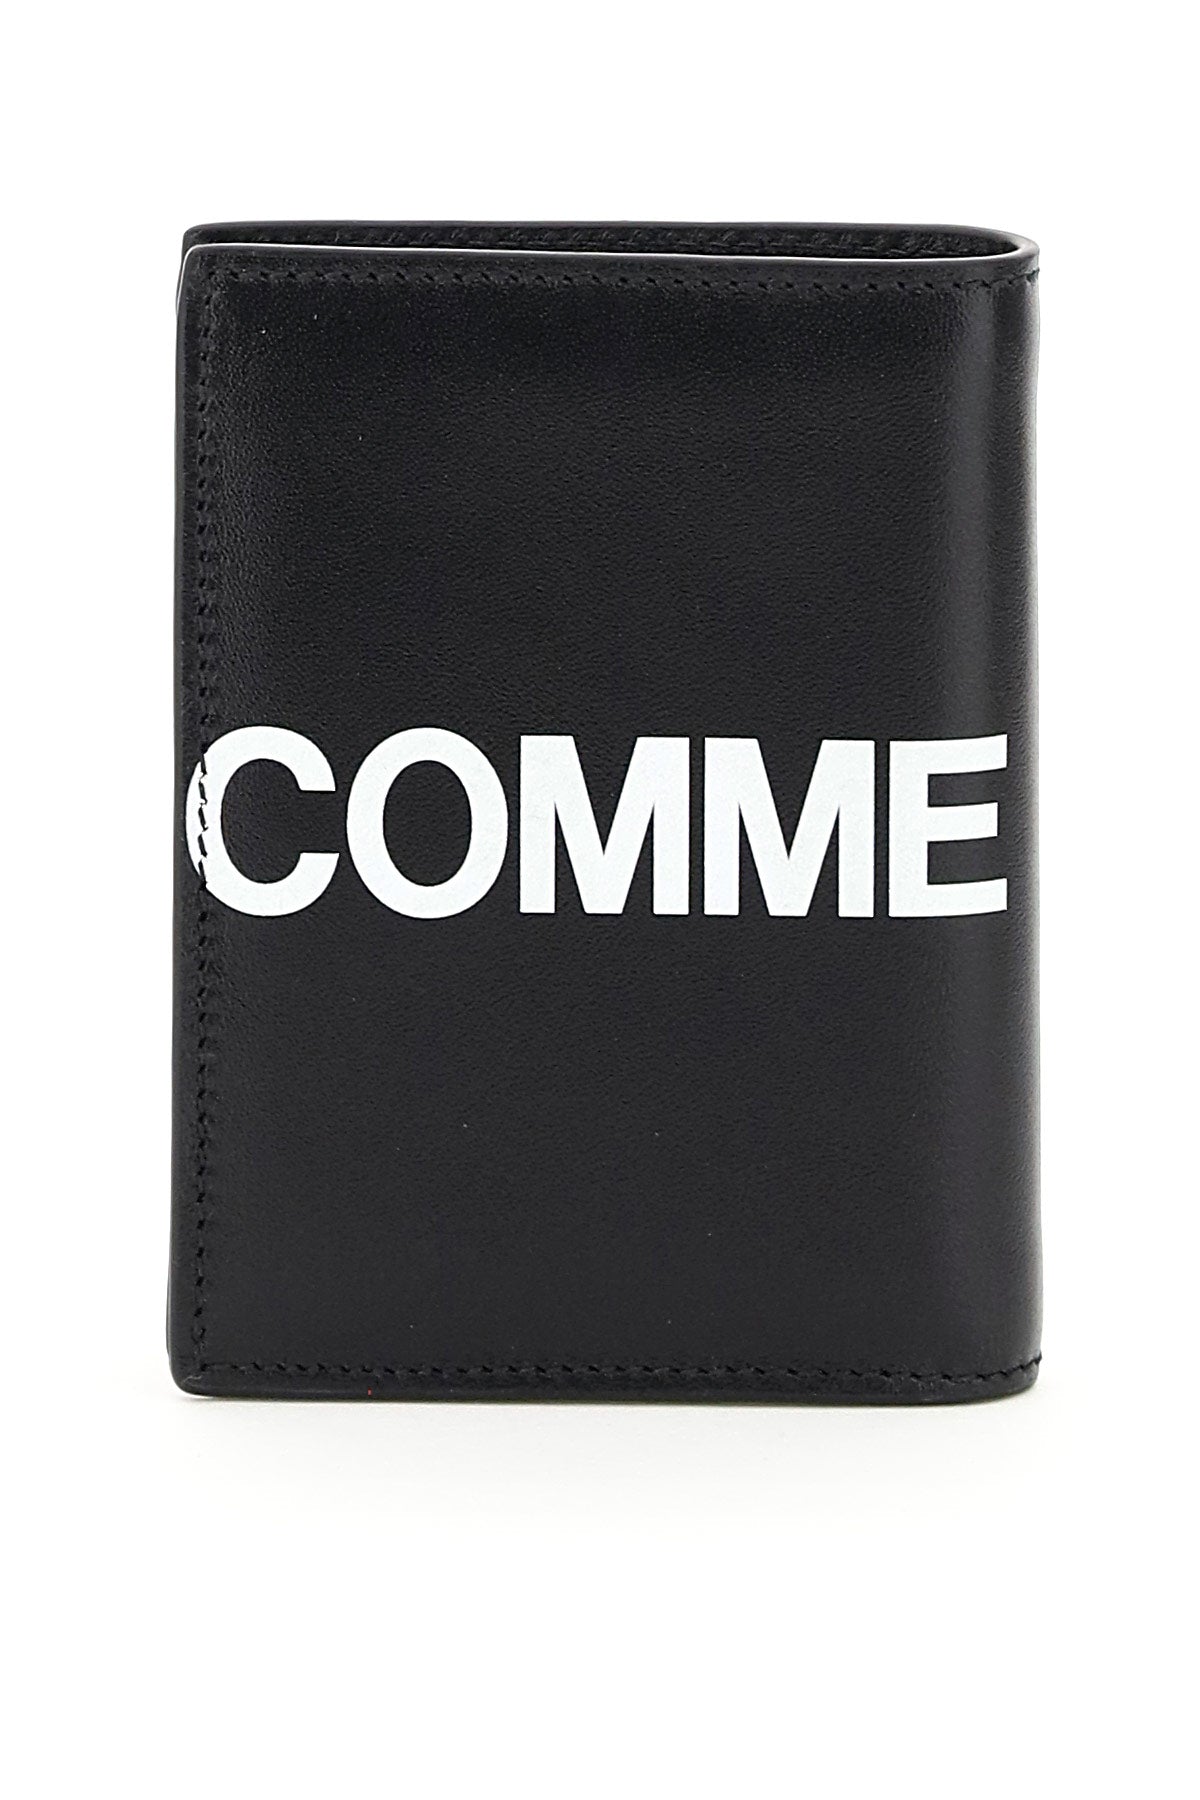 Comme des garcons wallet small bifold wallet with huge logo-2